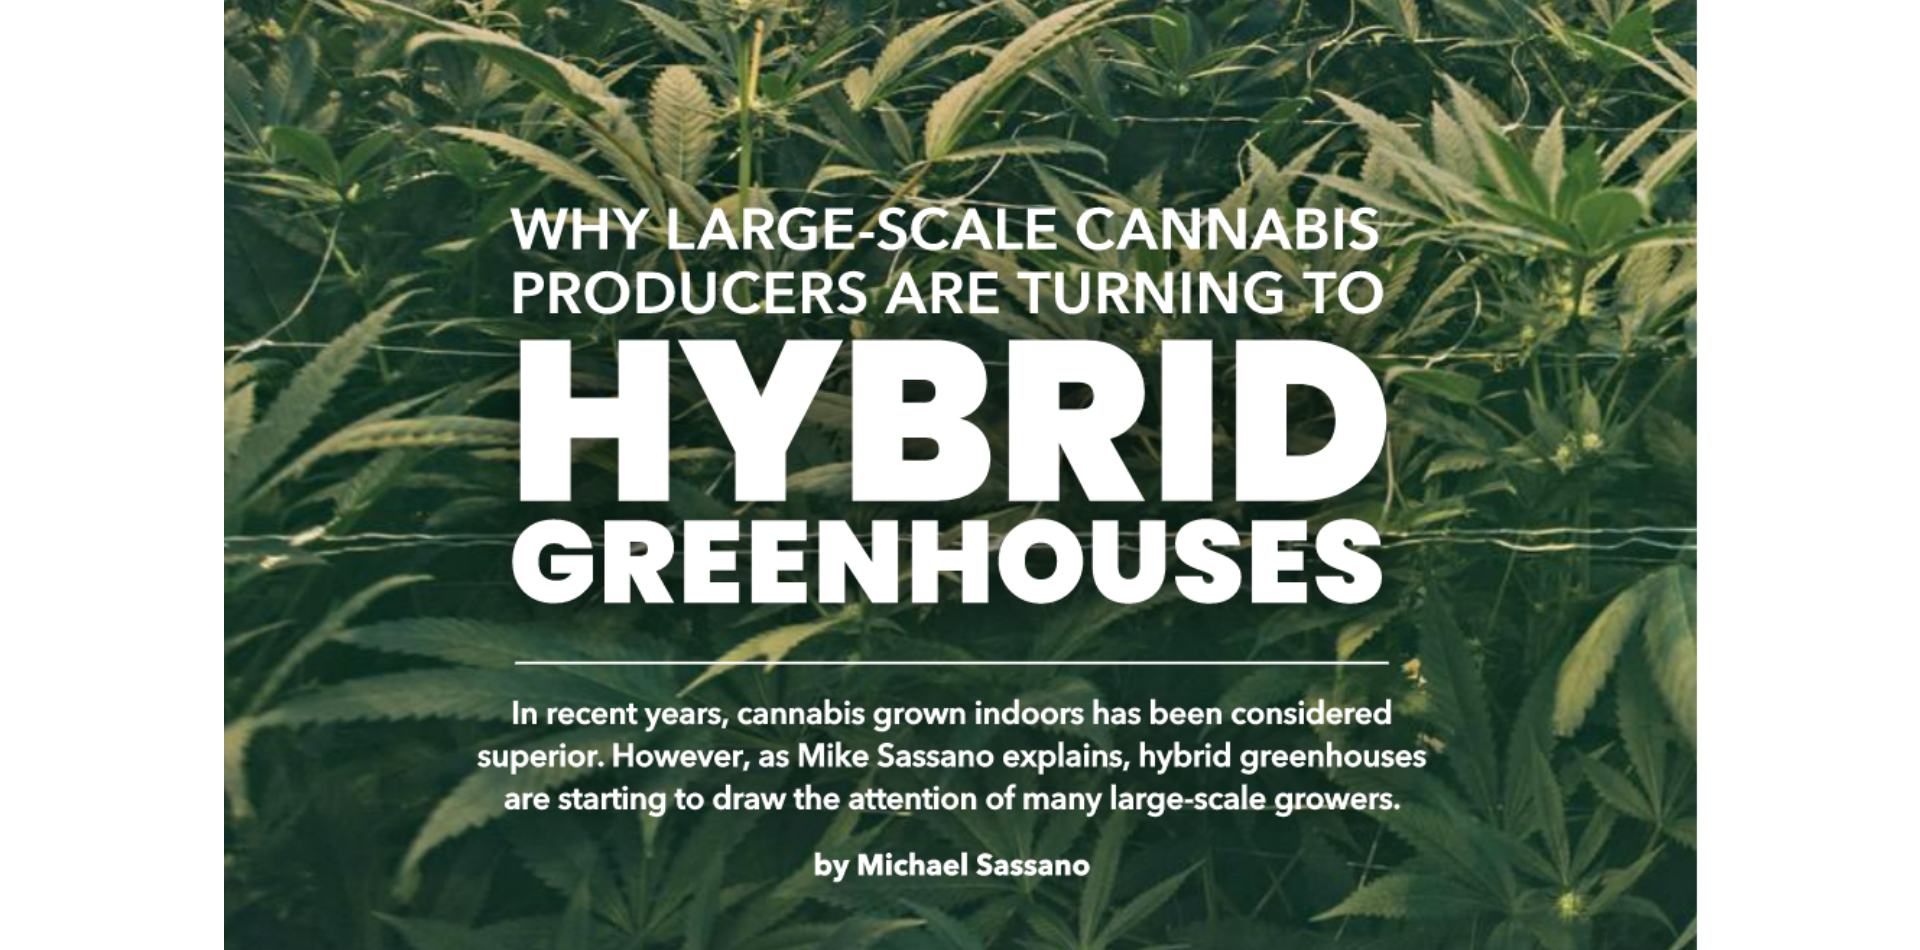 Why Large-scale cannabis producers are turning to Hybrid Greenhouses